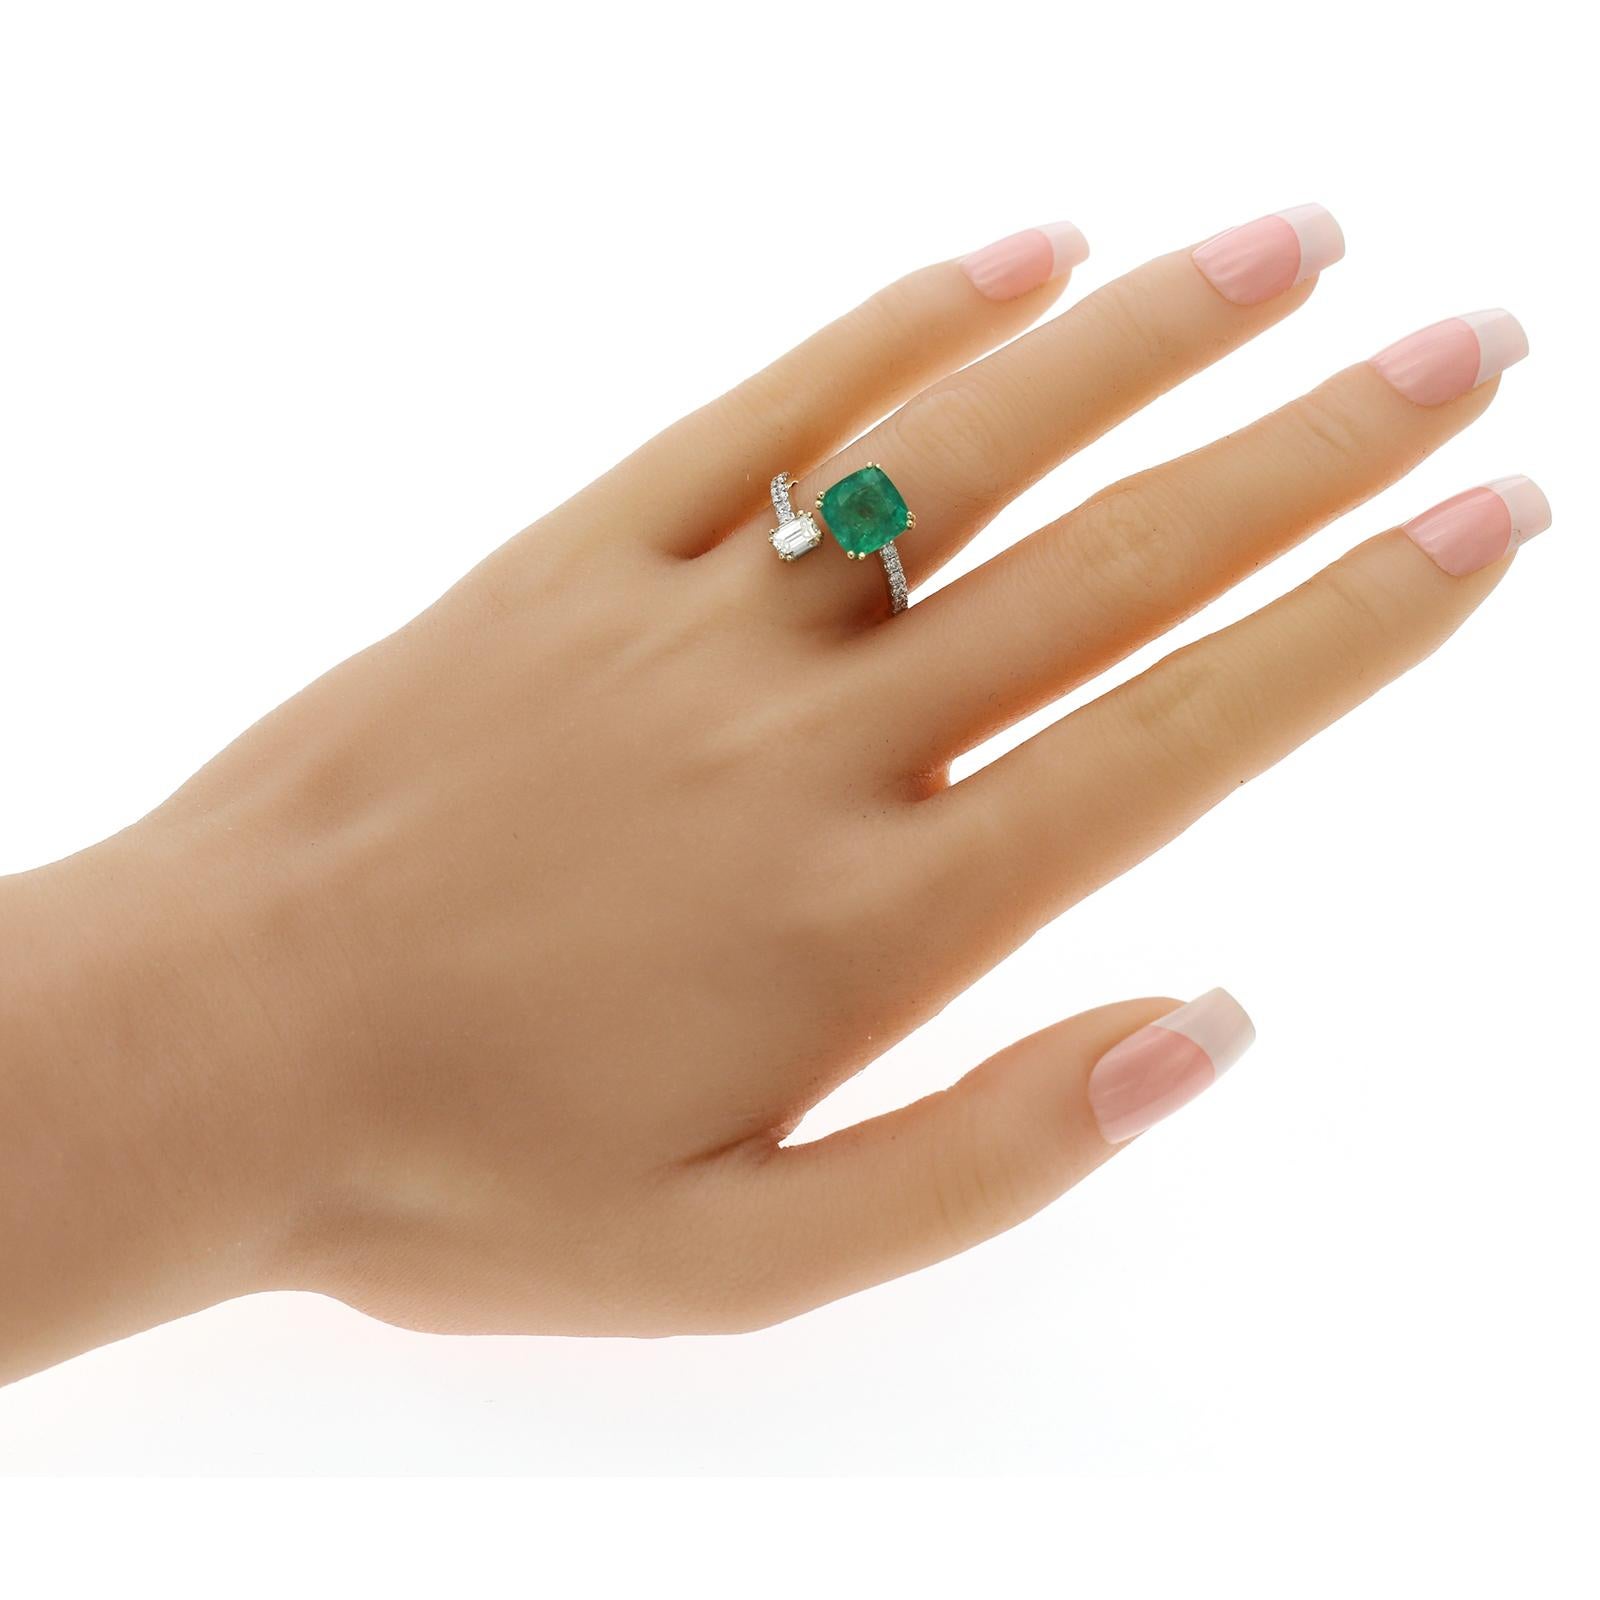 100% Authentic, 100% Customer Satisfaction

Height: 14.7 mm

Width: 2 mm

Size: 6.5 ( Contact Us for Sizing)

Metal:14K Yellow Gold

Hallmarks: 14K

Total Weight: 2.94 Grams

Stone Type: 2.55 CT Natural Colombian Emerald & 0.52 CT